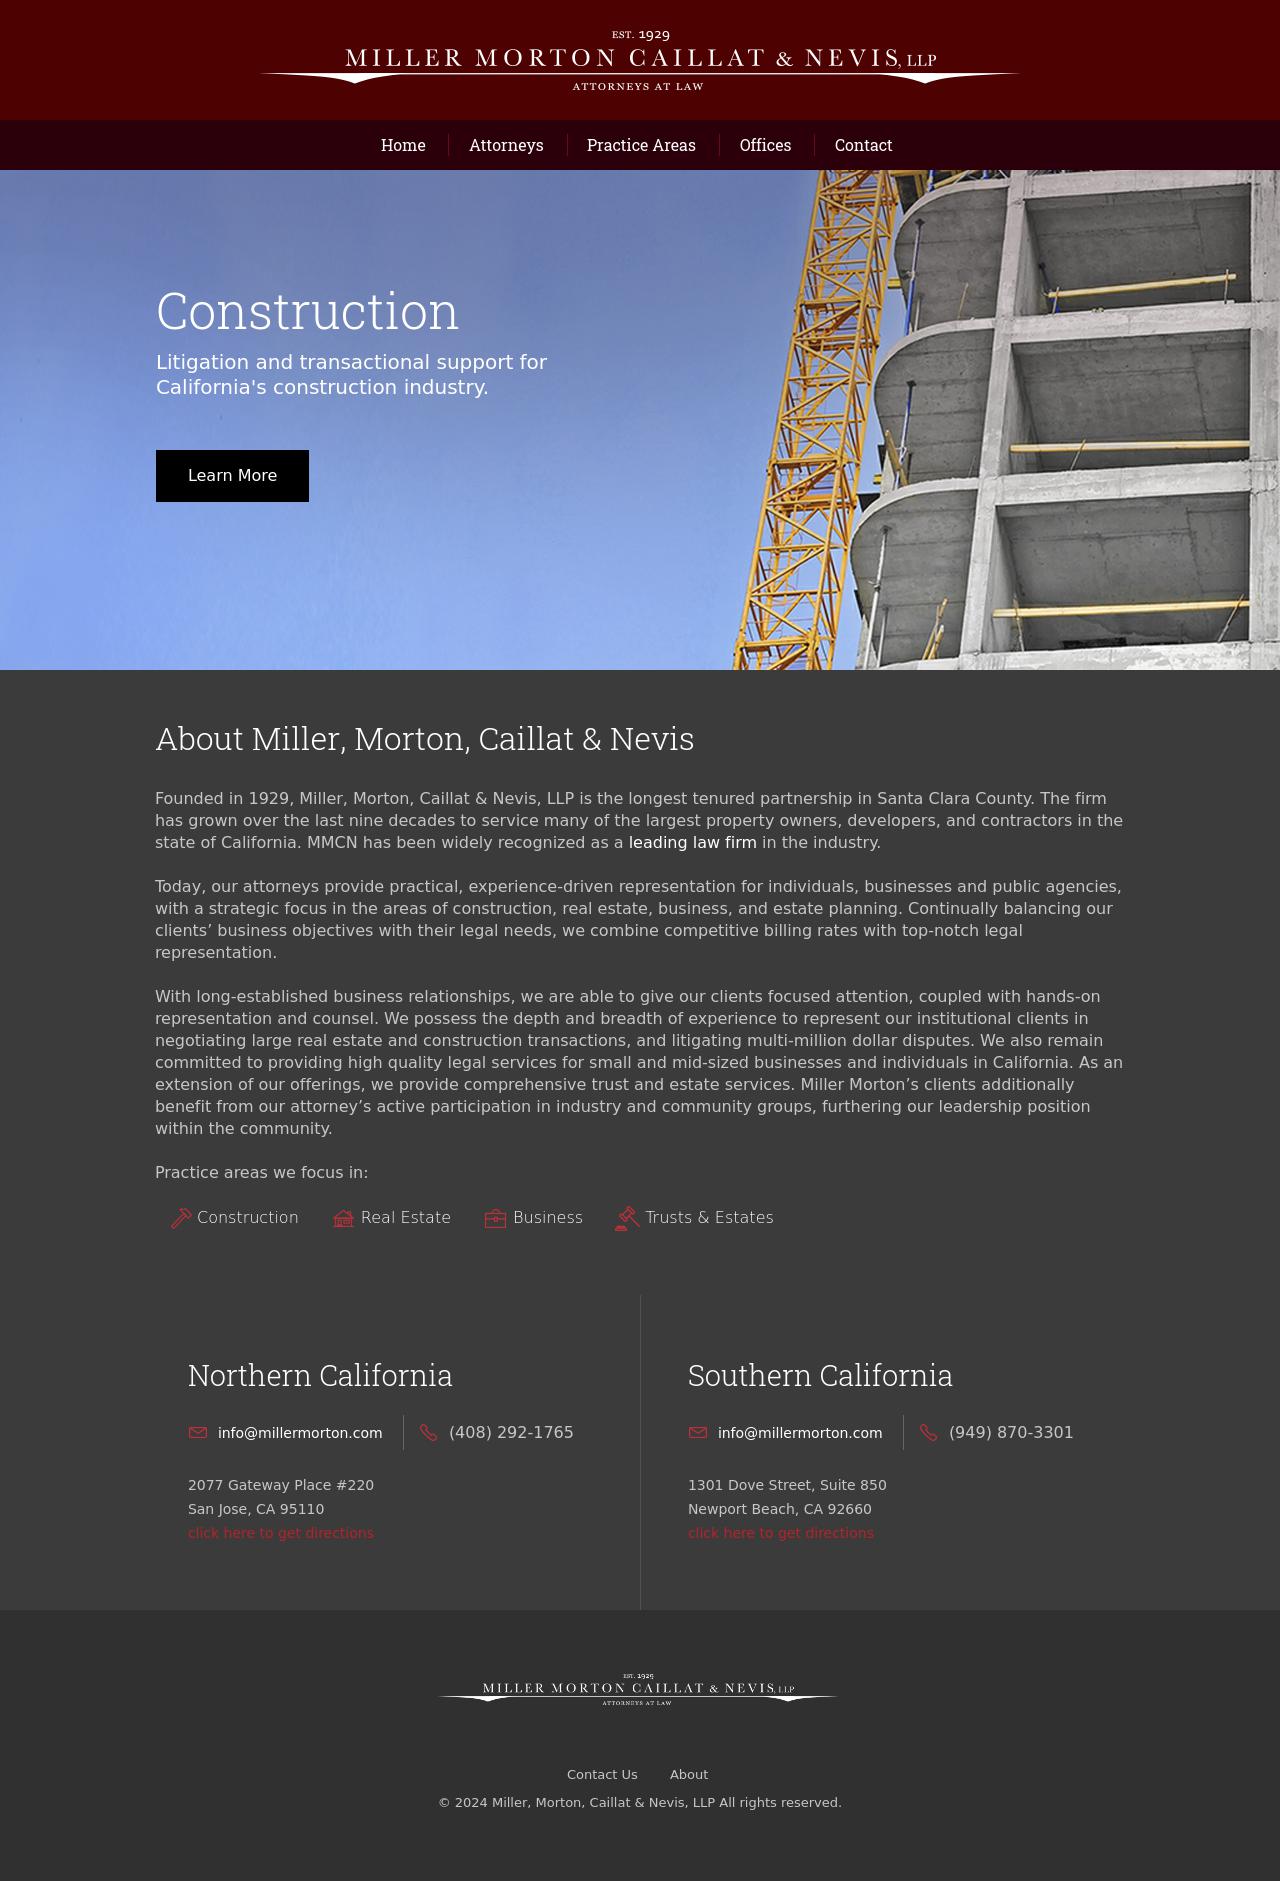 Miller Morton Caillat And Nevis - San Jose CA Lawyers